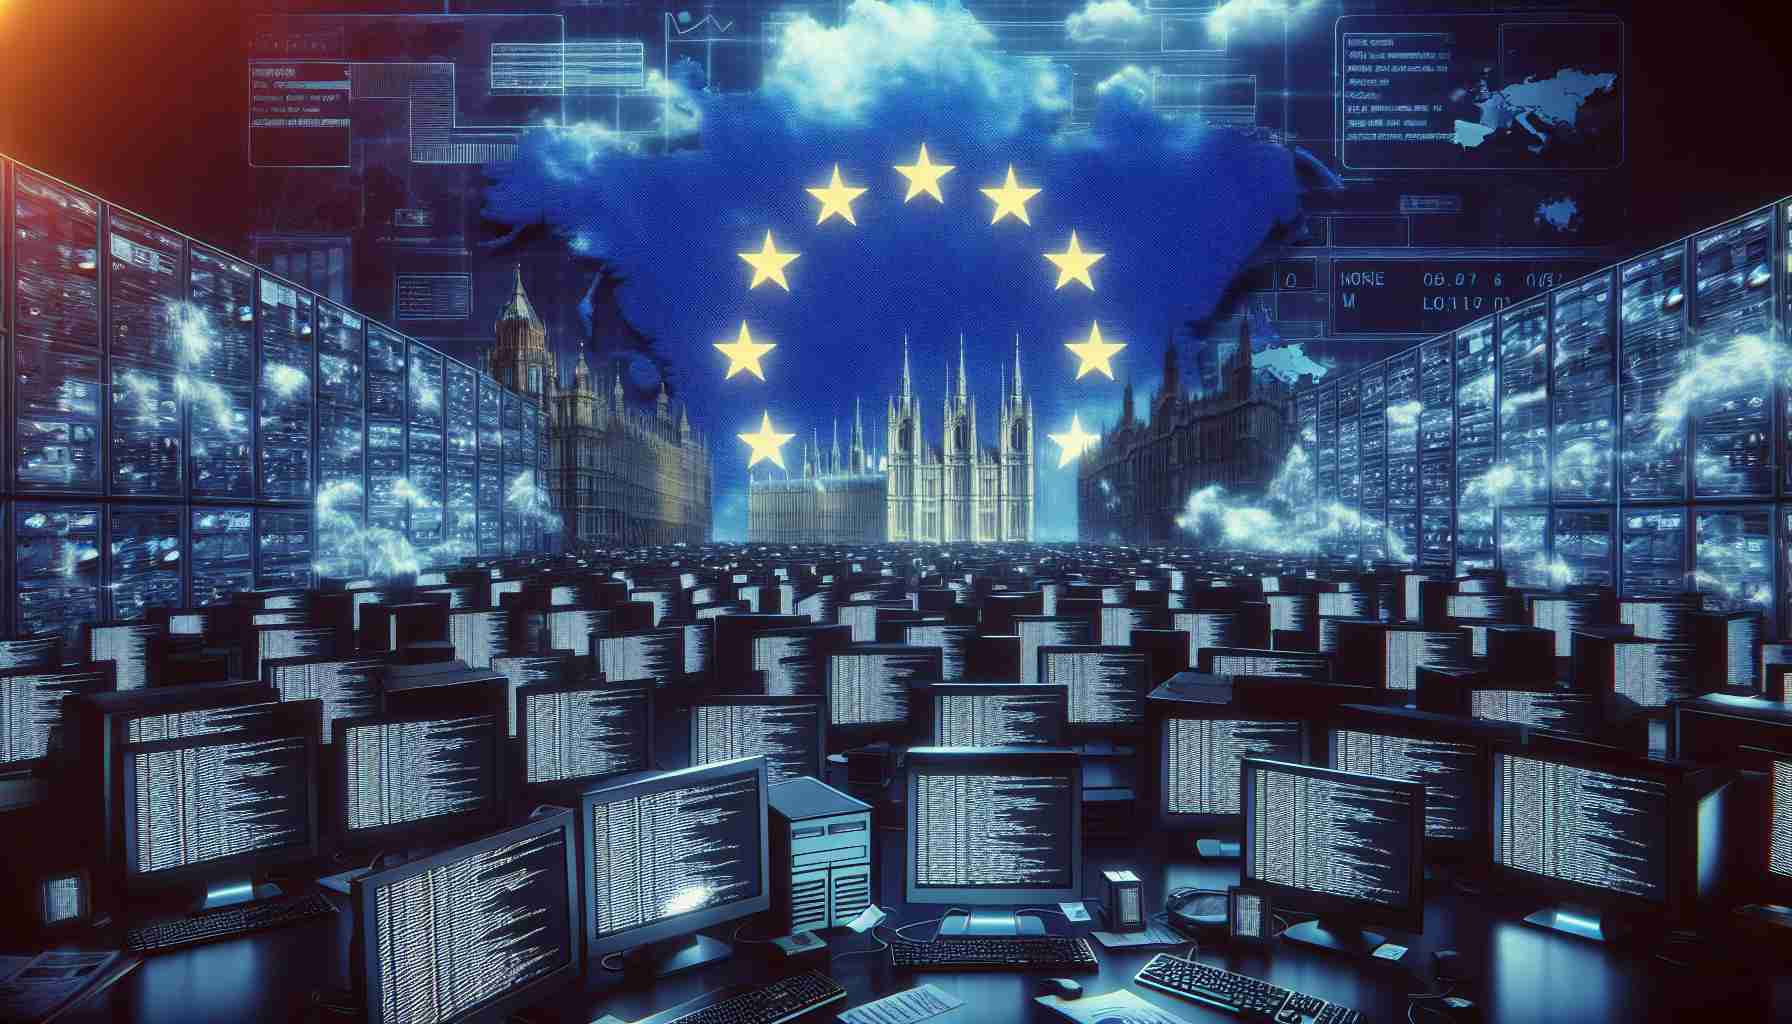 A realistic, high-definition image depicting the concept of a widespread computer outage, with possible symbolism like a lot of darkened computer screens and error messages. Also include a representation of the European Union as a backdrop, perhaps through a large European Union flag or notable landmarks, suggesting it has influence over the situation.